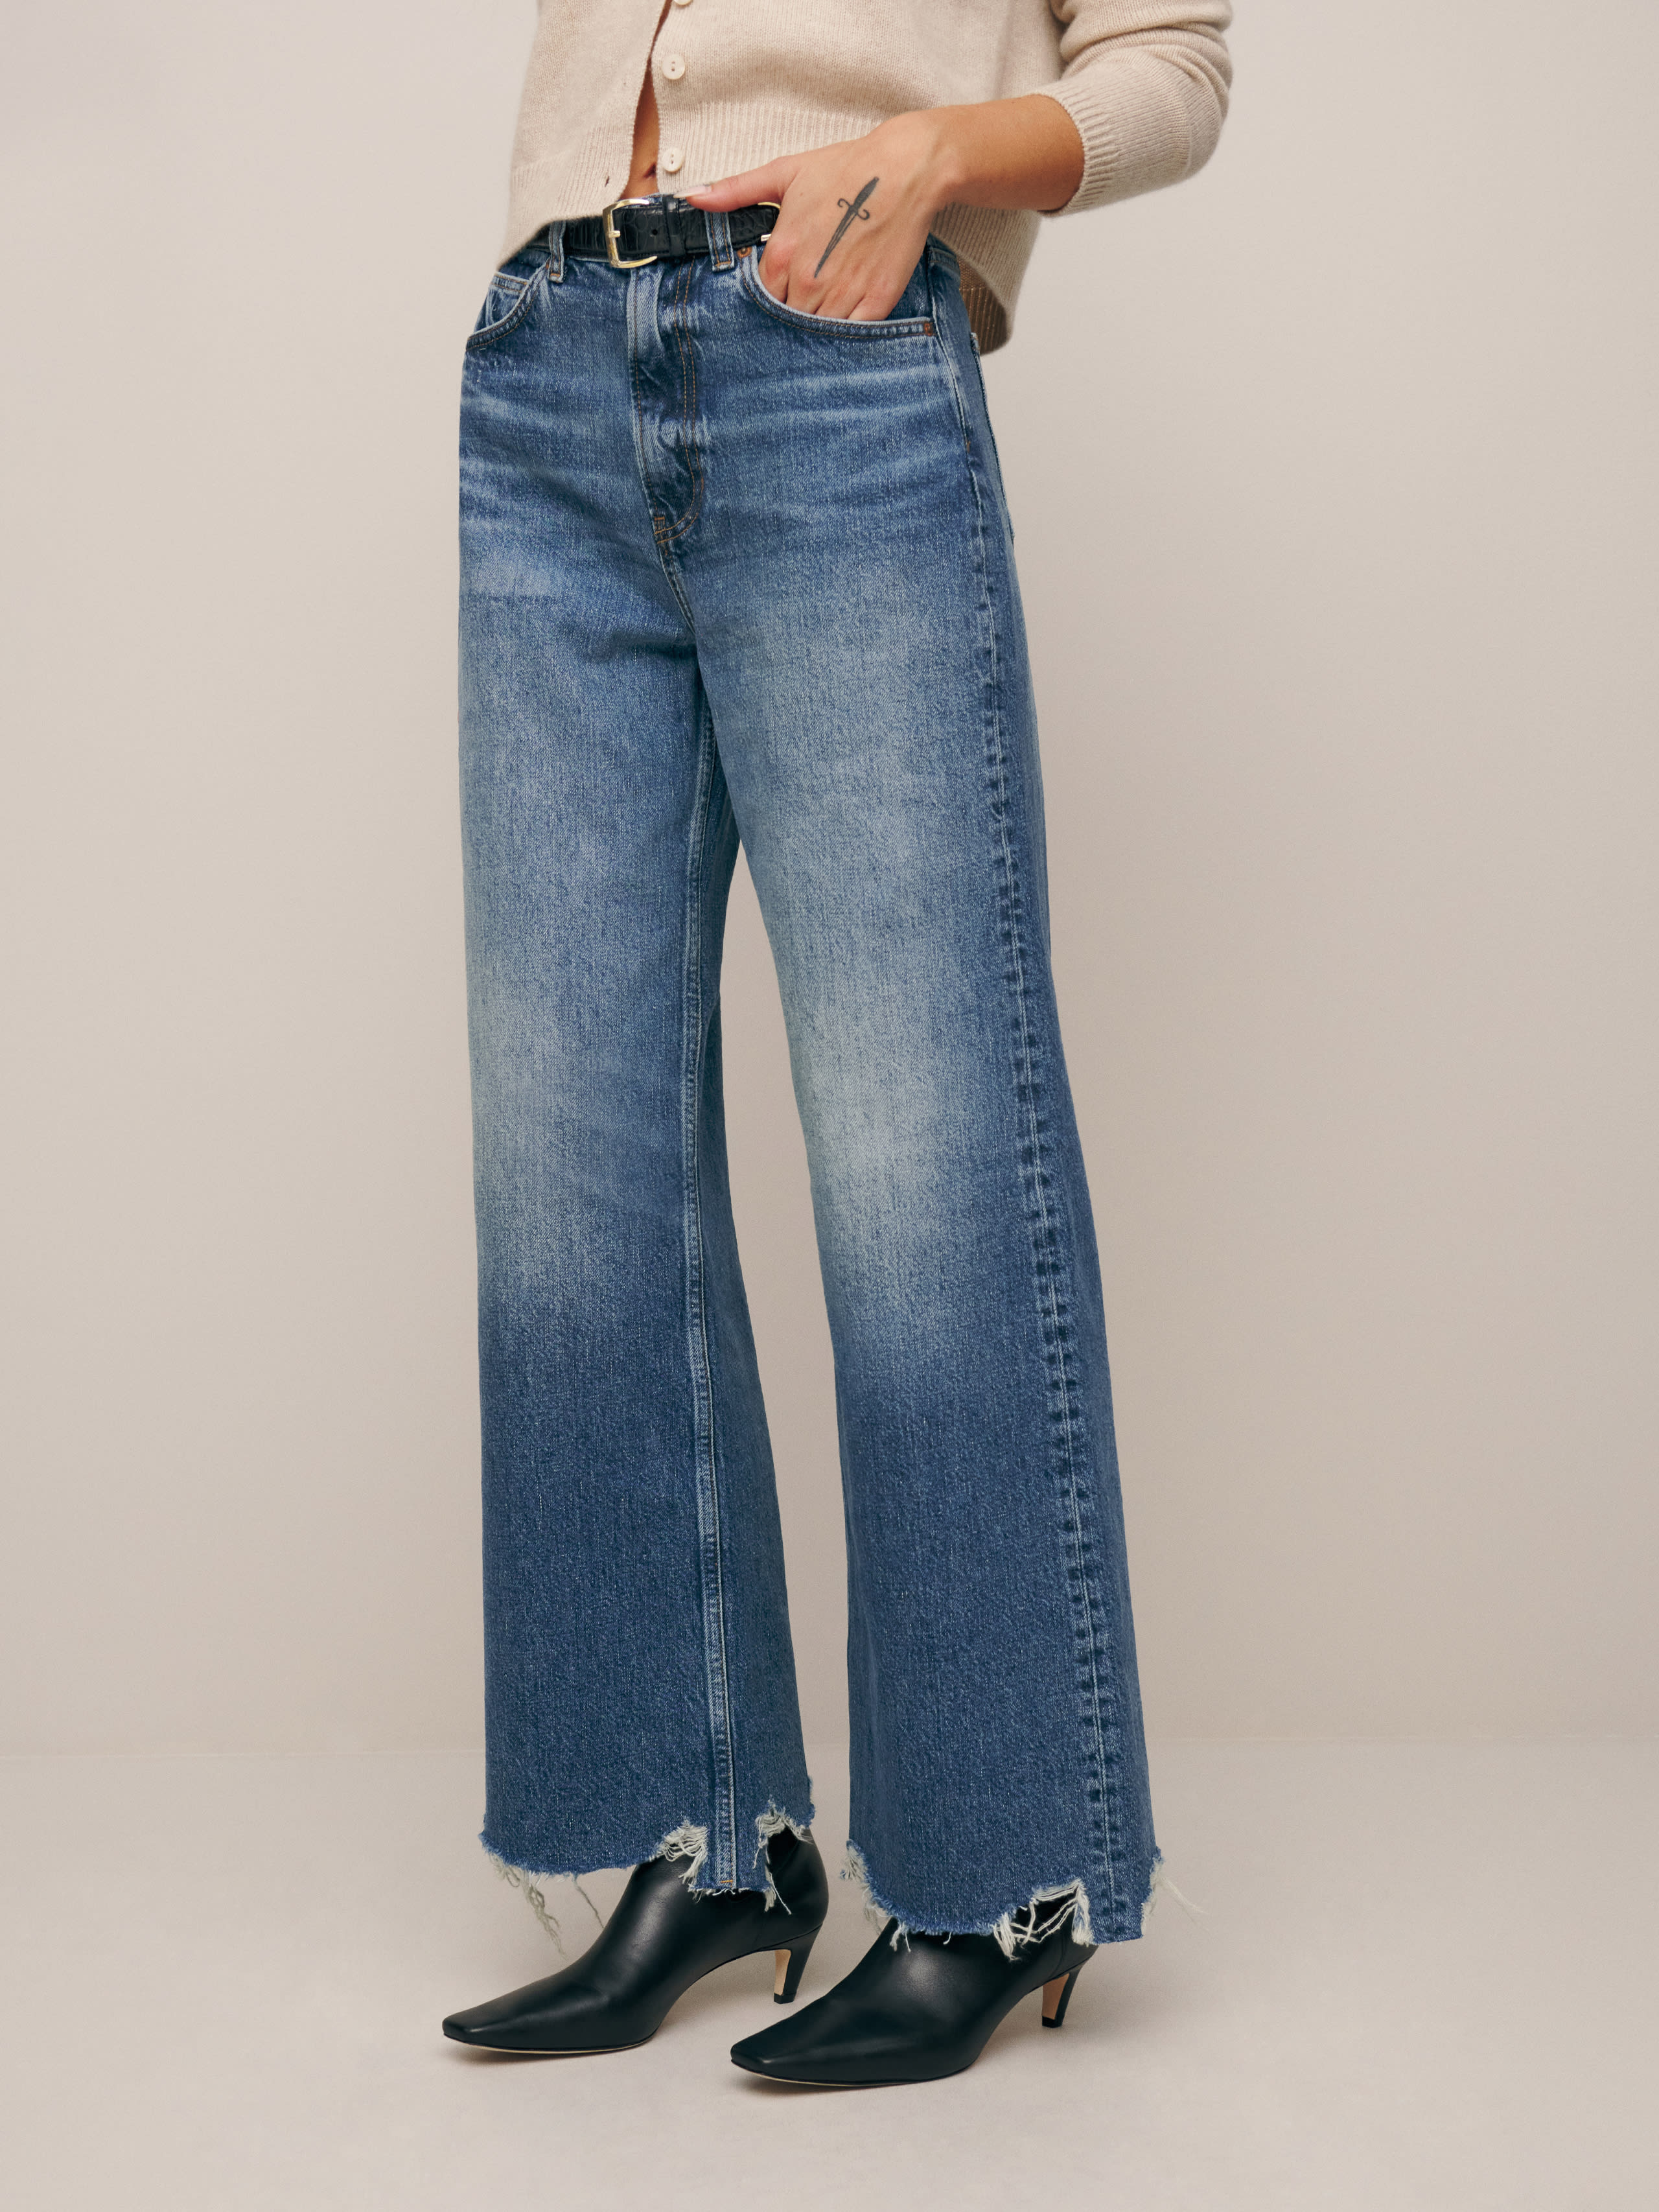 Reformation Cary High Rise Slouchy Wide Leg Cropped Jeans In Hemlock Destroyed Hem